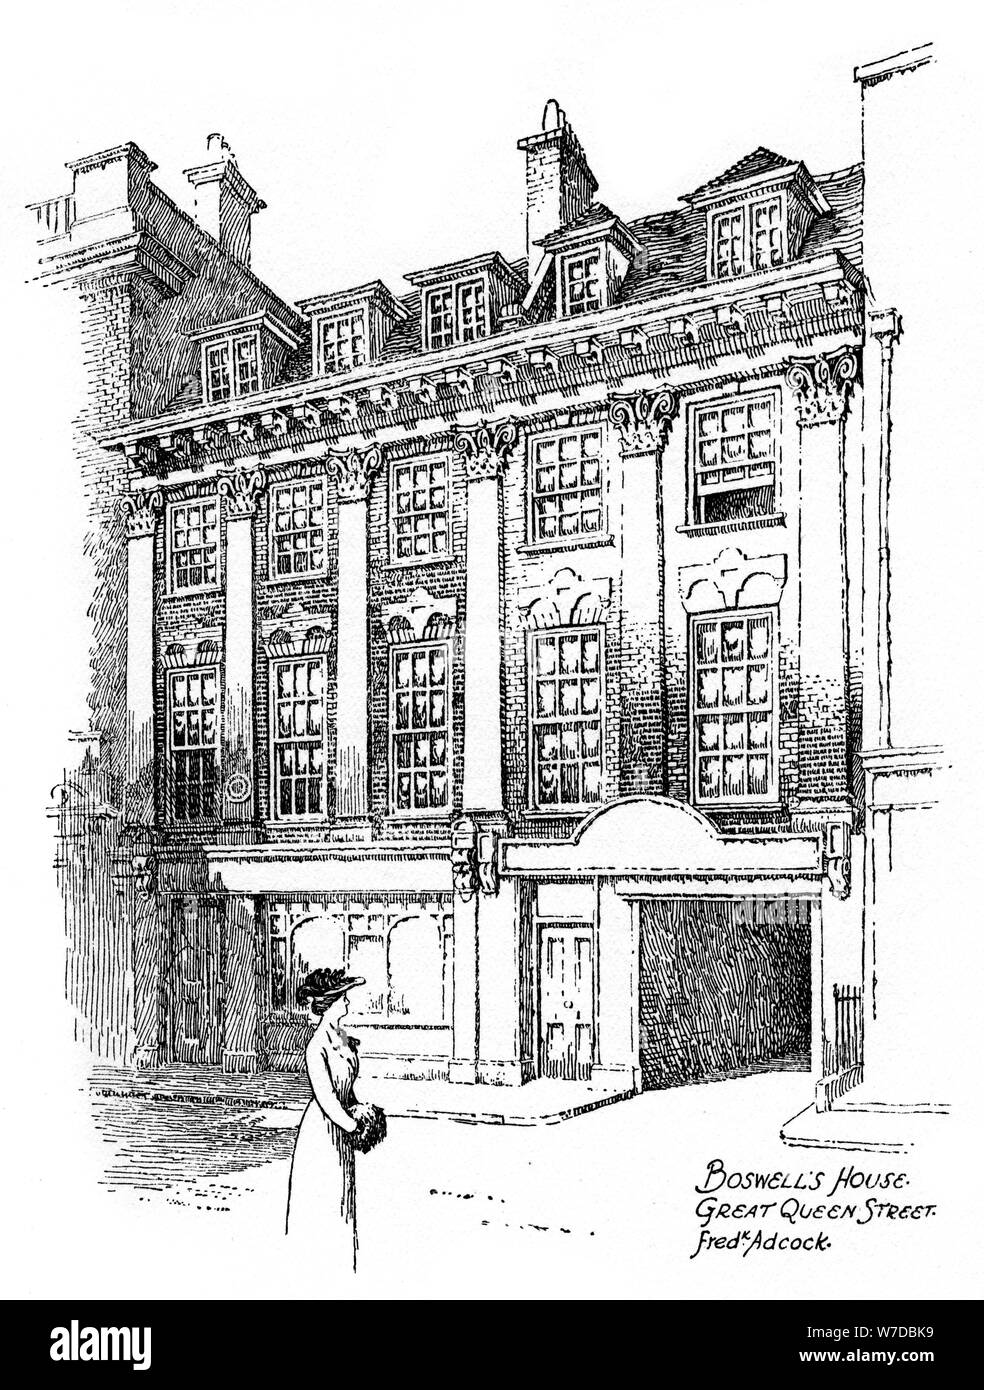 James Boswell's House, Great Queen Street, Covent Garden, Londra, 1912. Artista: Federico Adcock Foto Stock